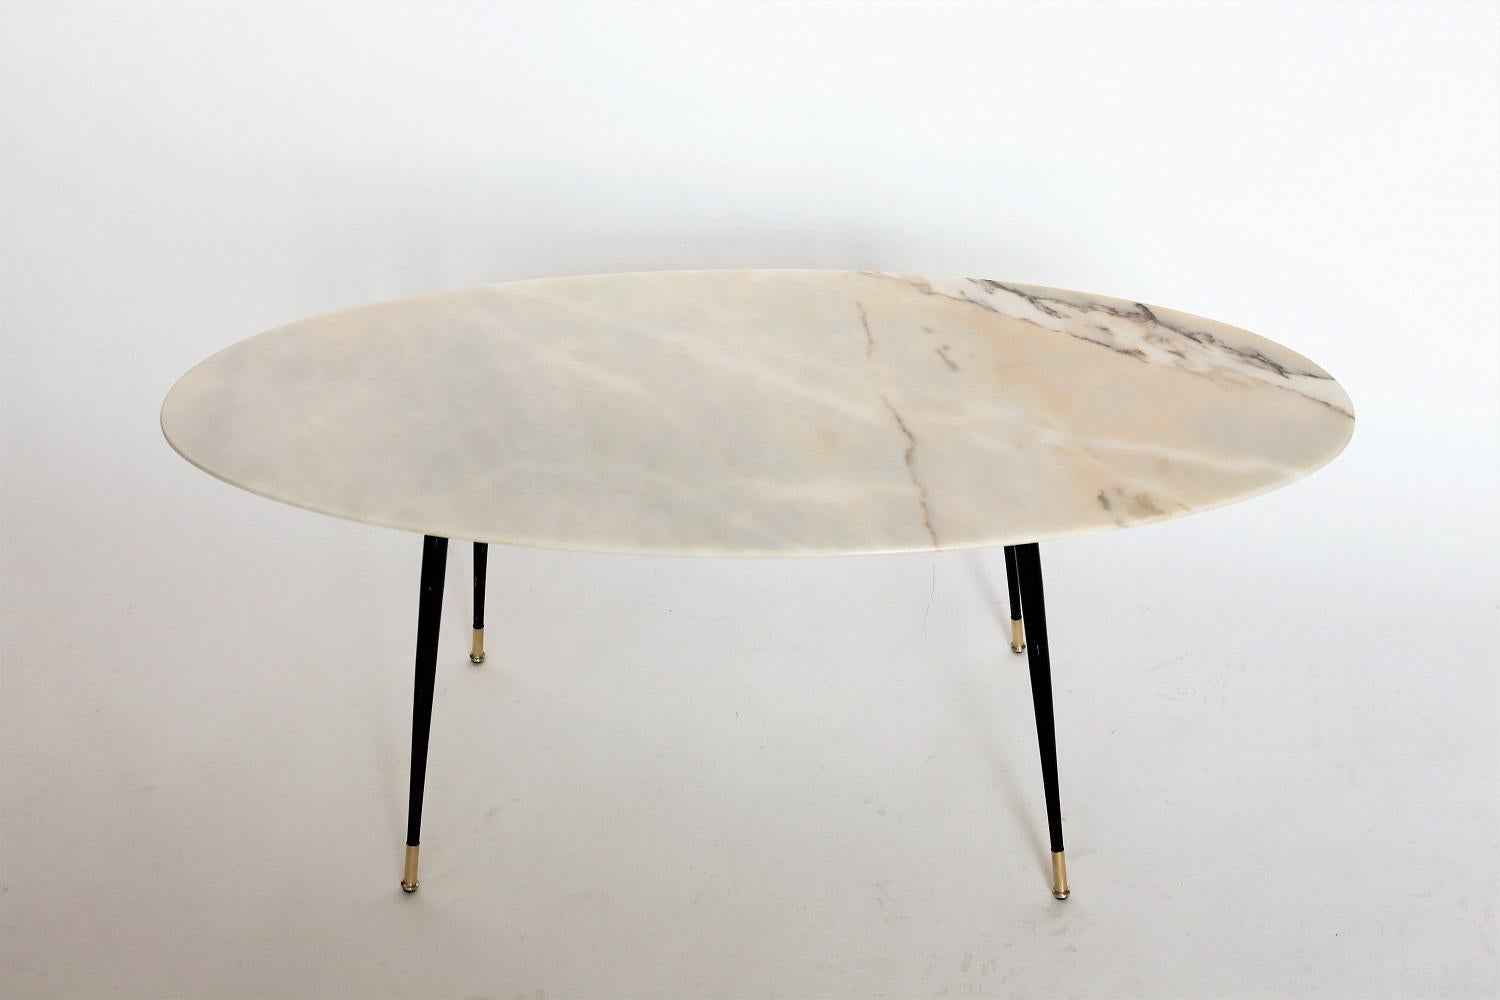 Magnificent coffee table with gorgeous elegant pink marble top and metallic legs with brass tips.
Made in Italy during the 1950s.
The marble is called 